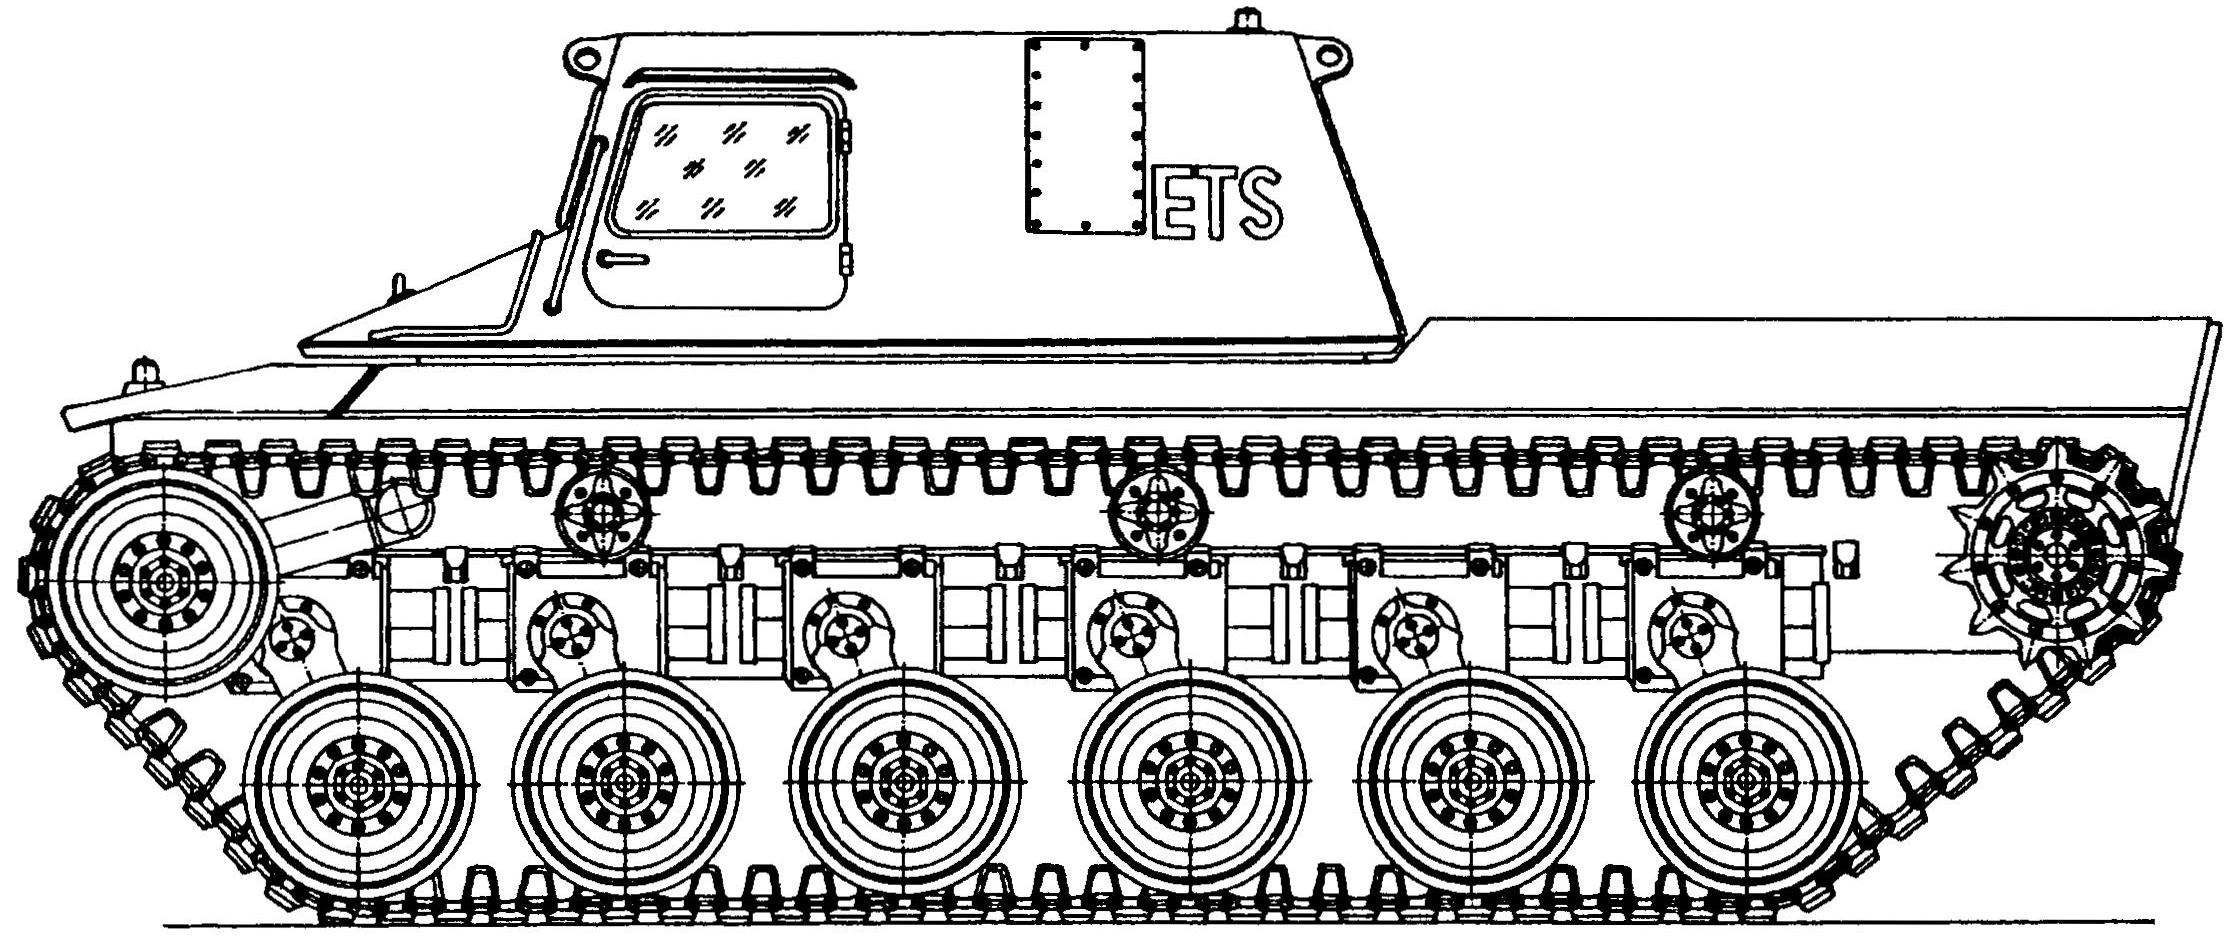 Chassis layout chassis of the MBT-70 (West German version) at maximum clearance